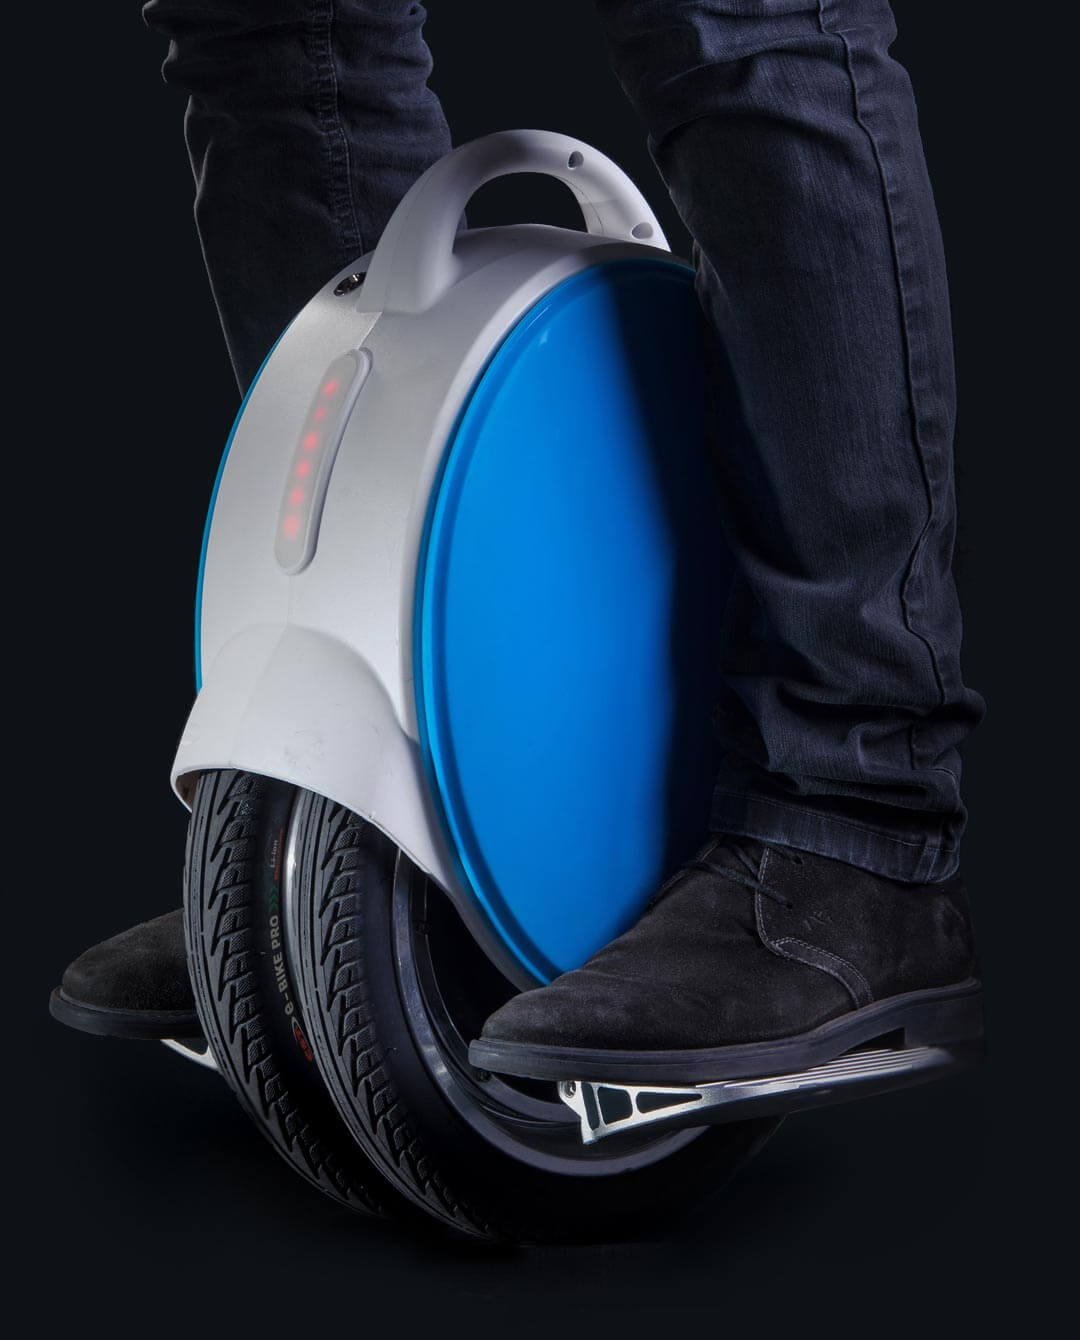 NEW Airwheel Q5 Electric Unicycle Scooter - Twin Wheel - Blue A